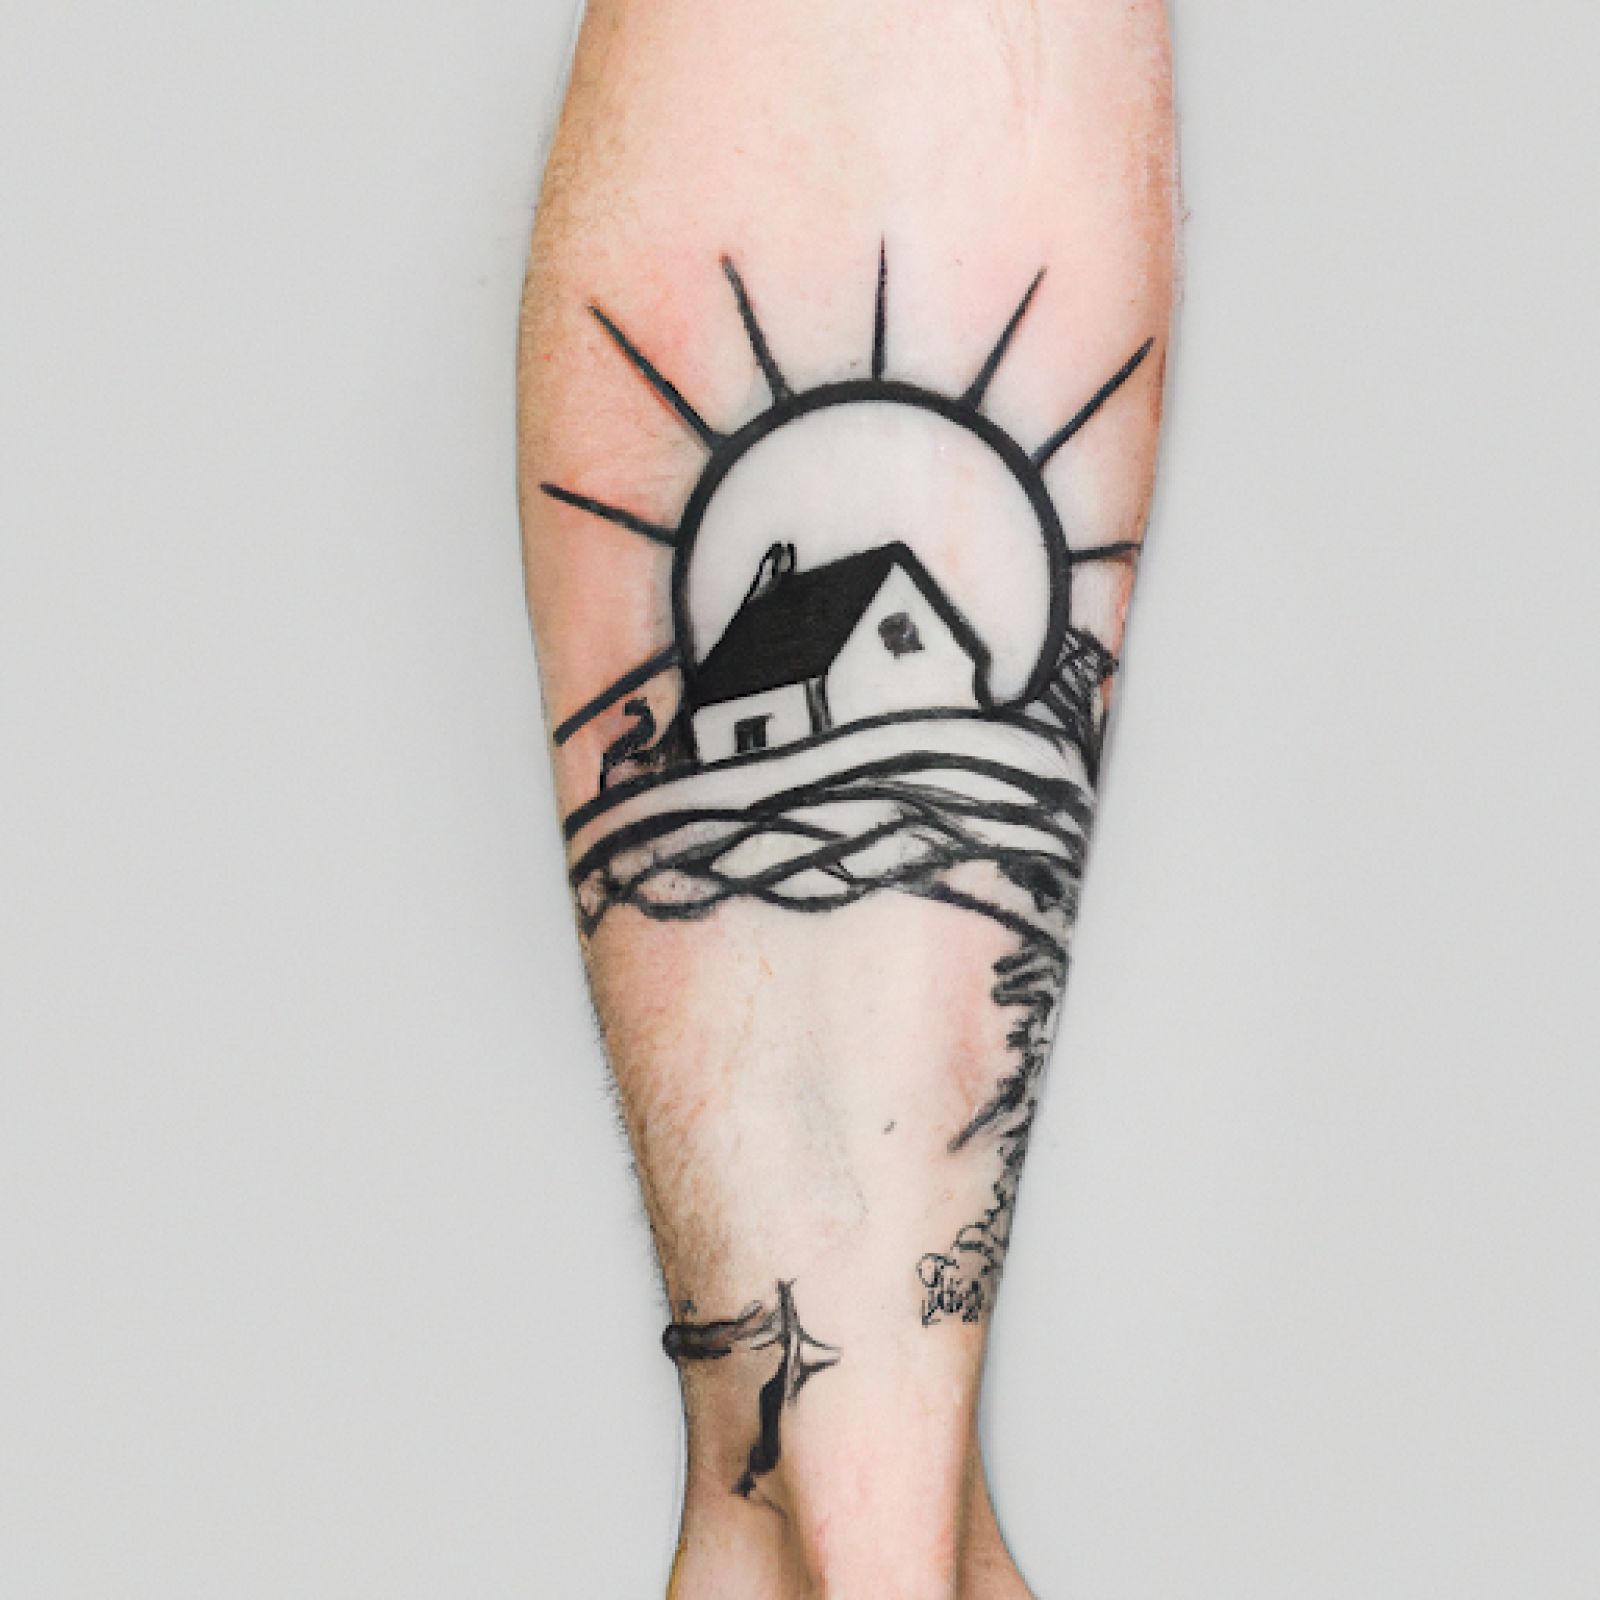 Watercolor tattoo on calf for men